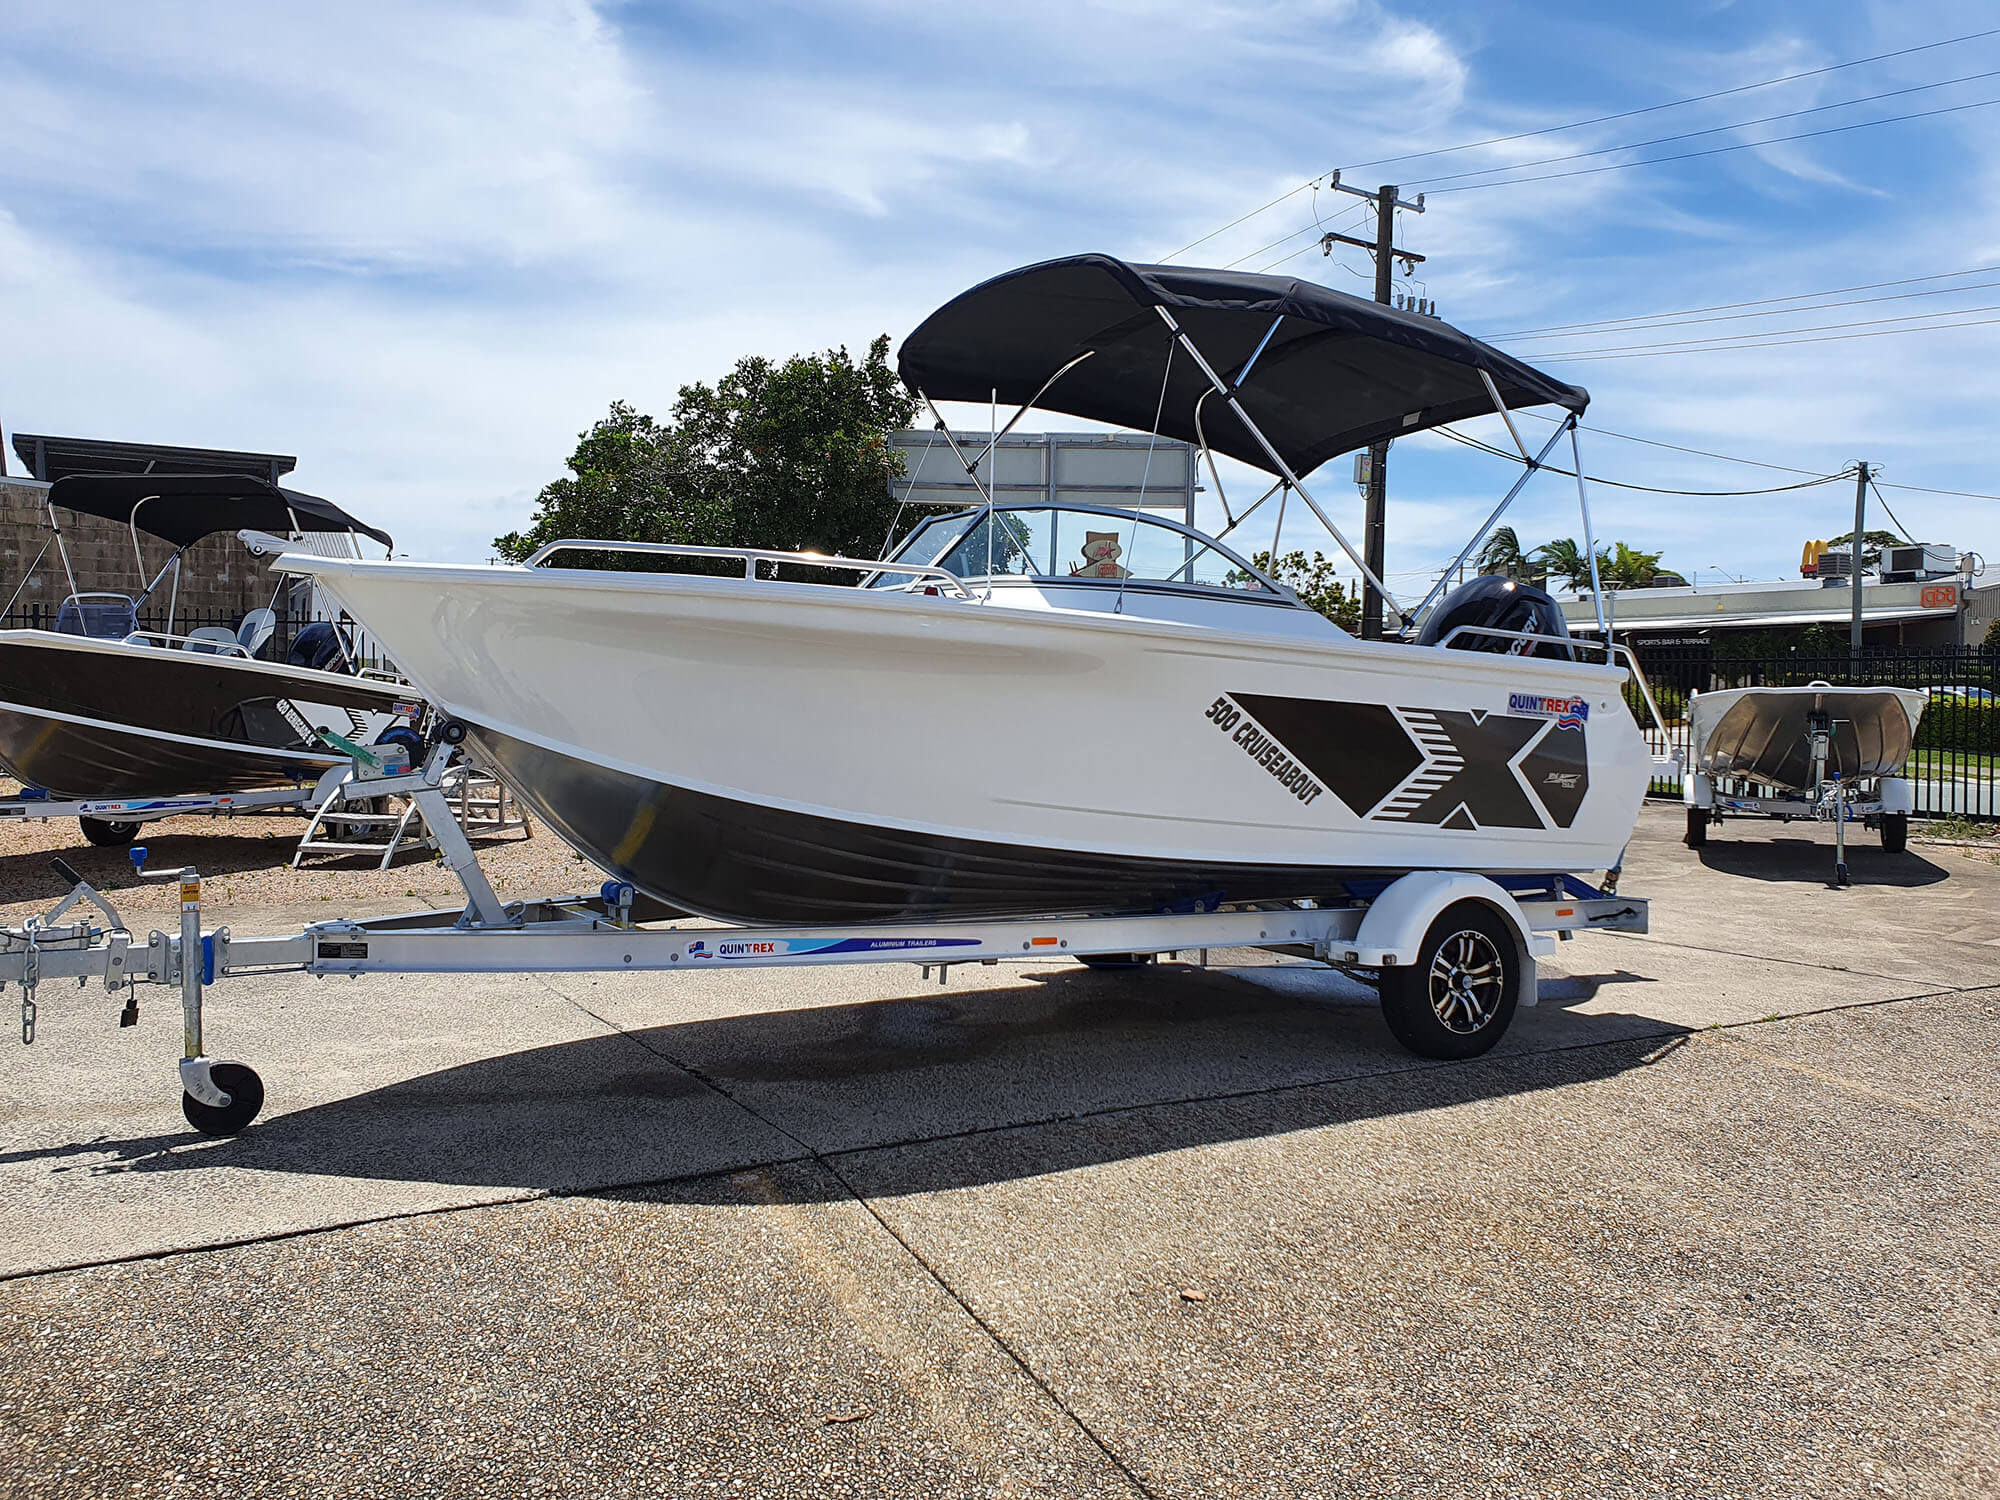 New Quintrex 500 Cruiseabout - Caloundra Marine Boats & Services